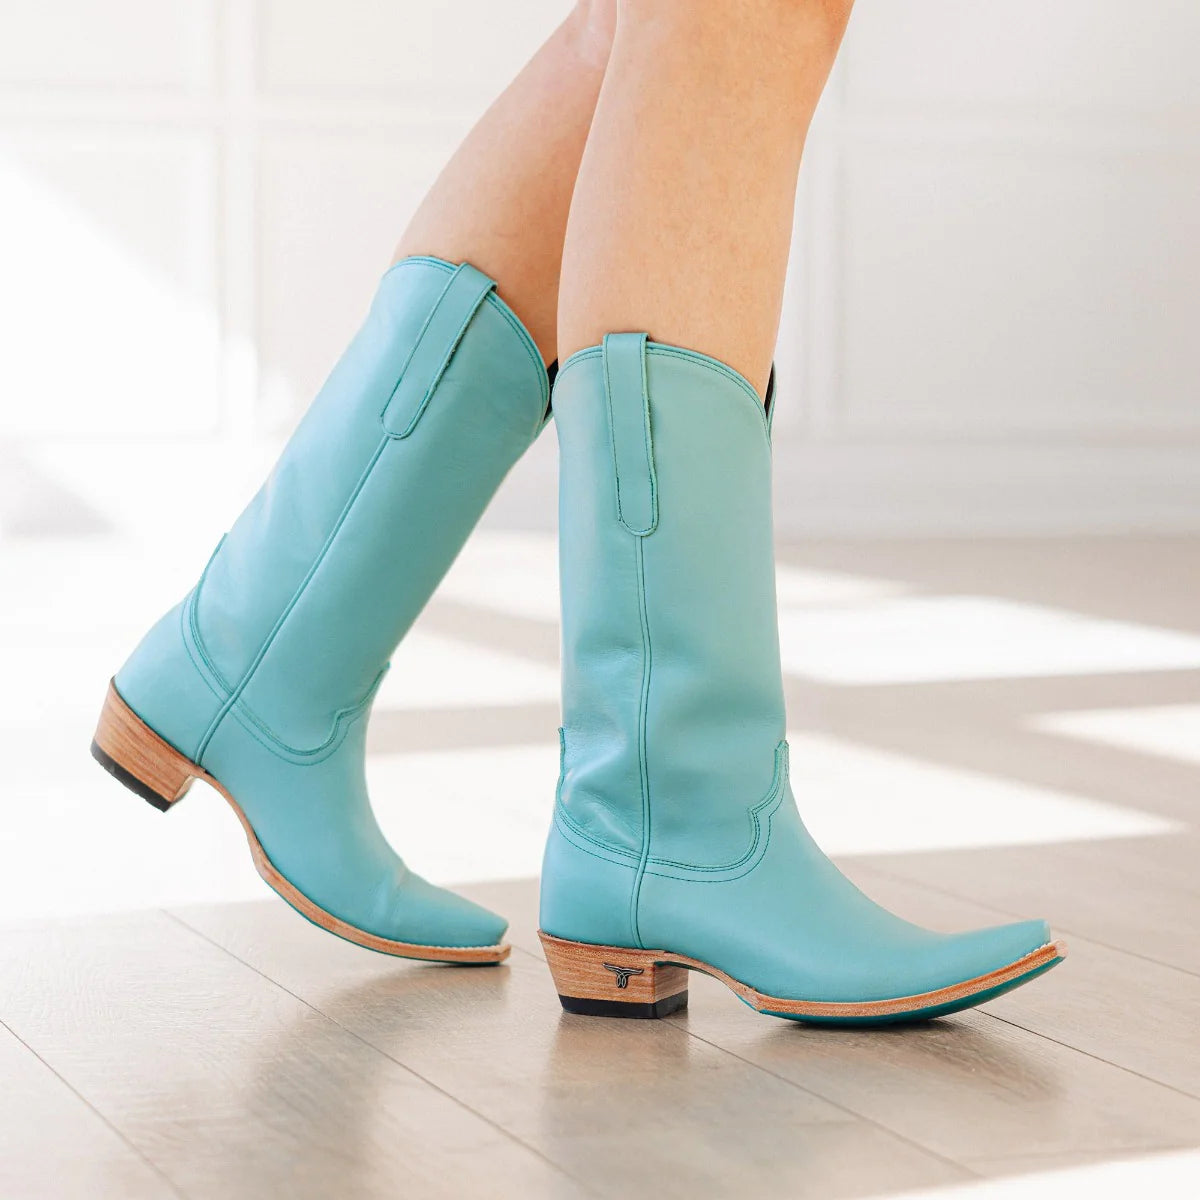 Emma Jane by Lane Boots, Turquoise Blaze Cowgirl Boots| Bourbon Cowgirl